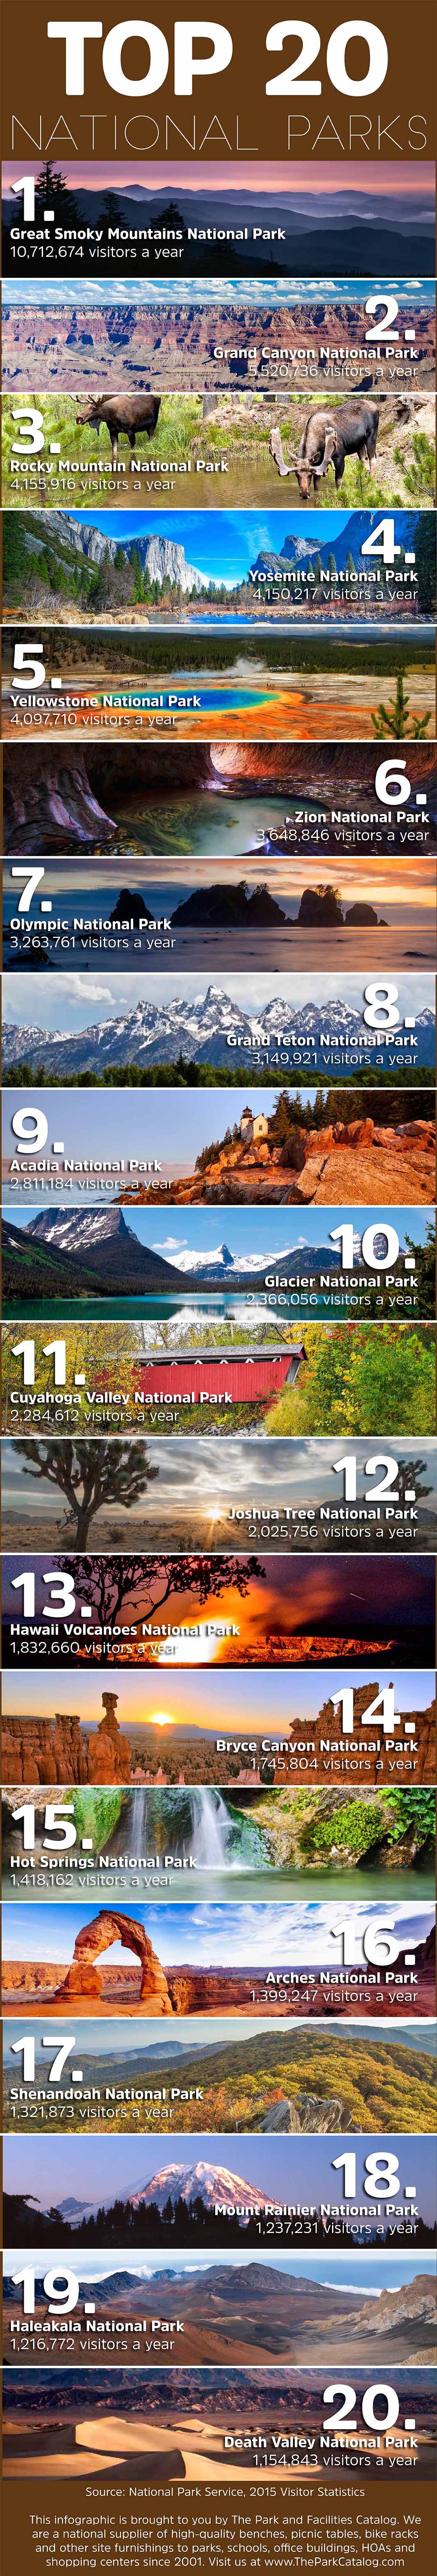 Top 20 National Parks 2015